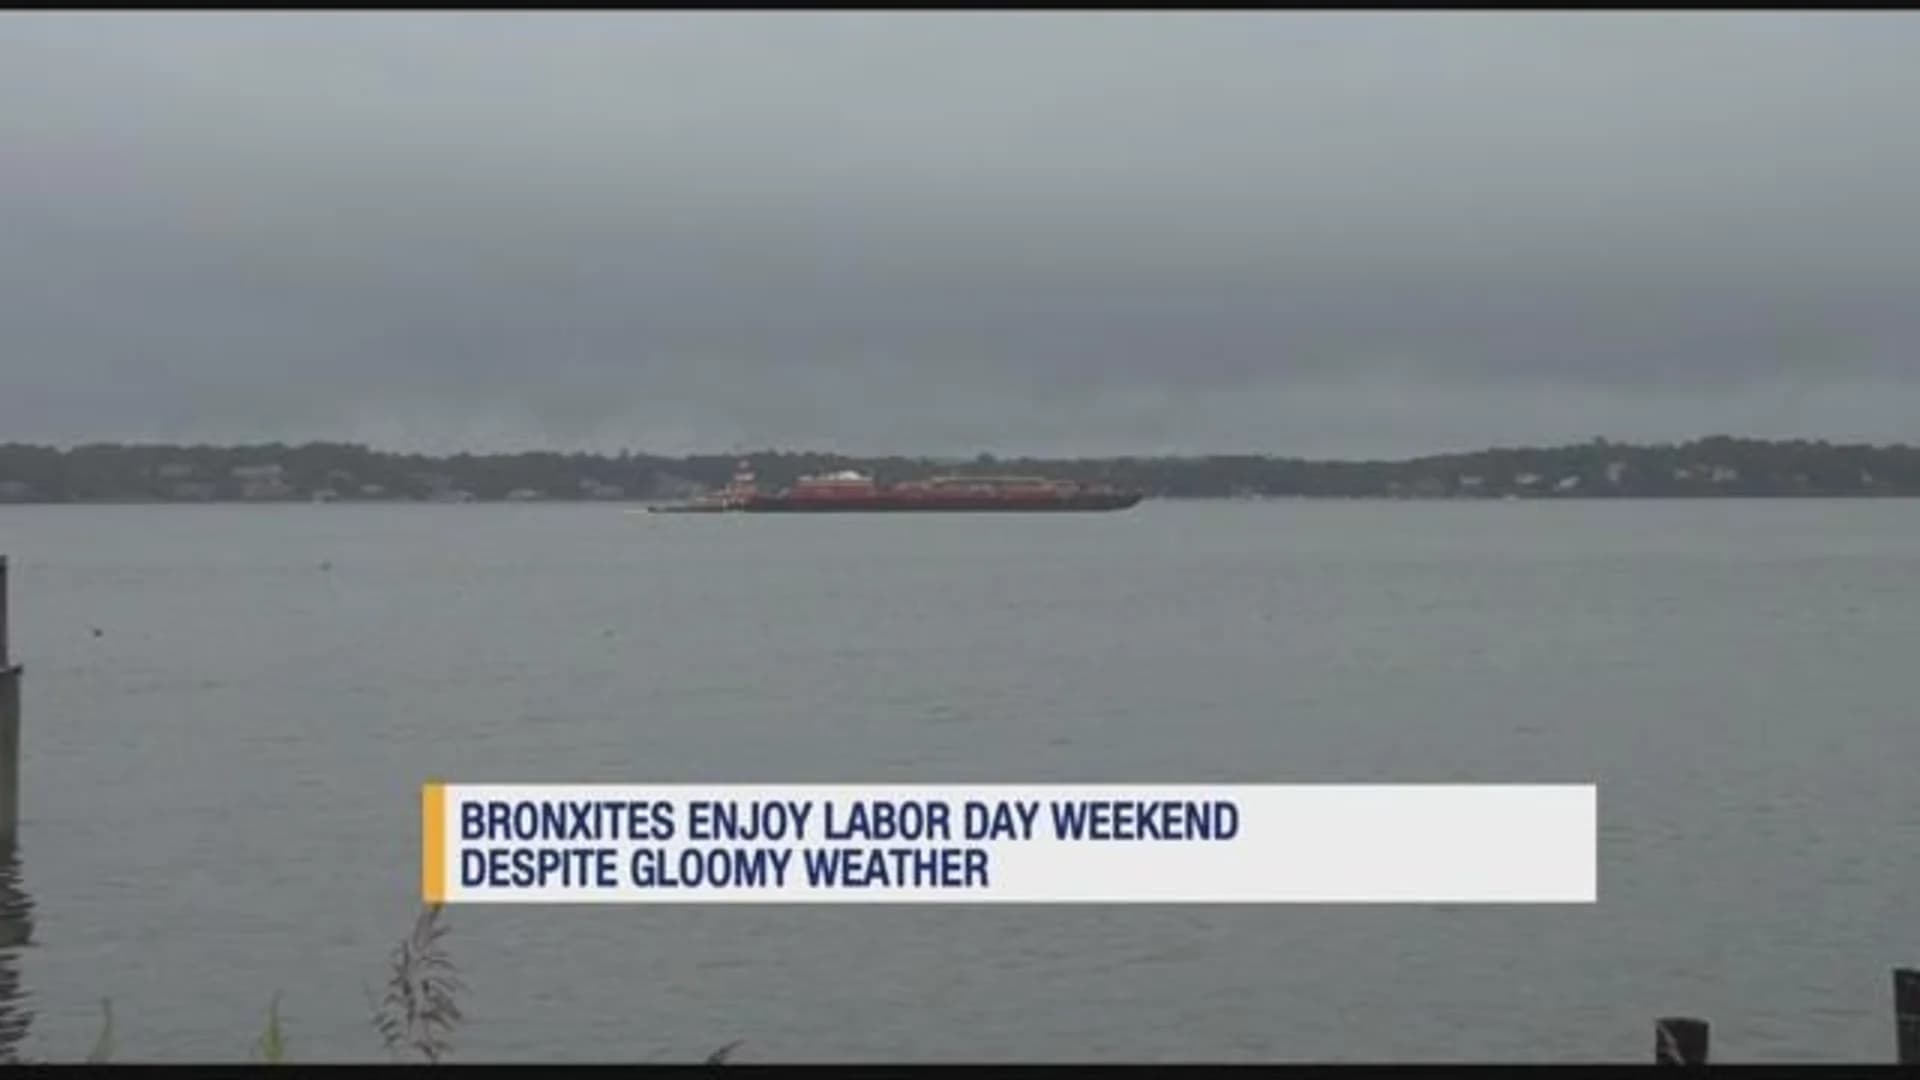 Business, residents hope for better weather on Labor Day